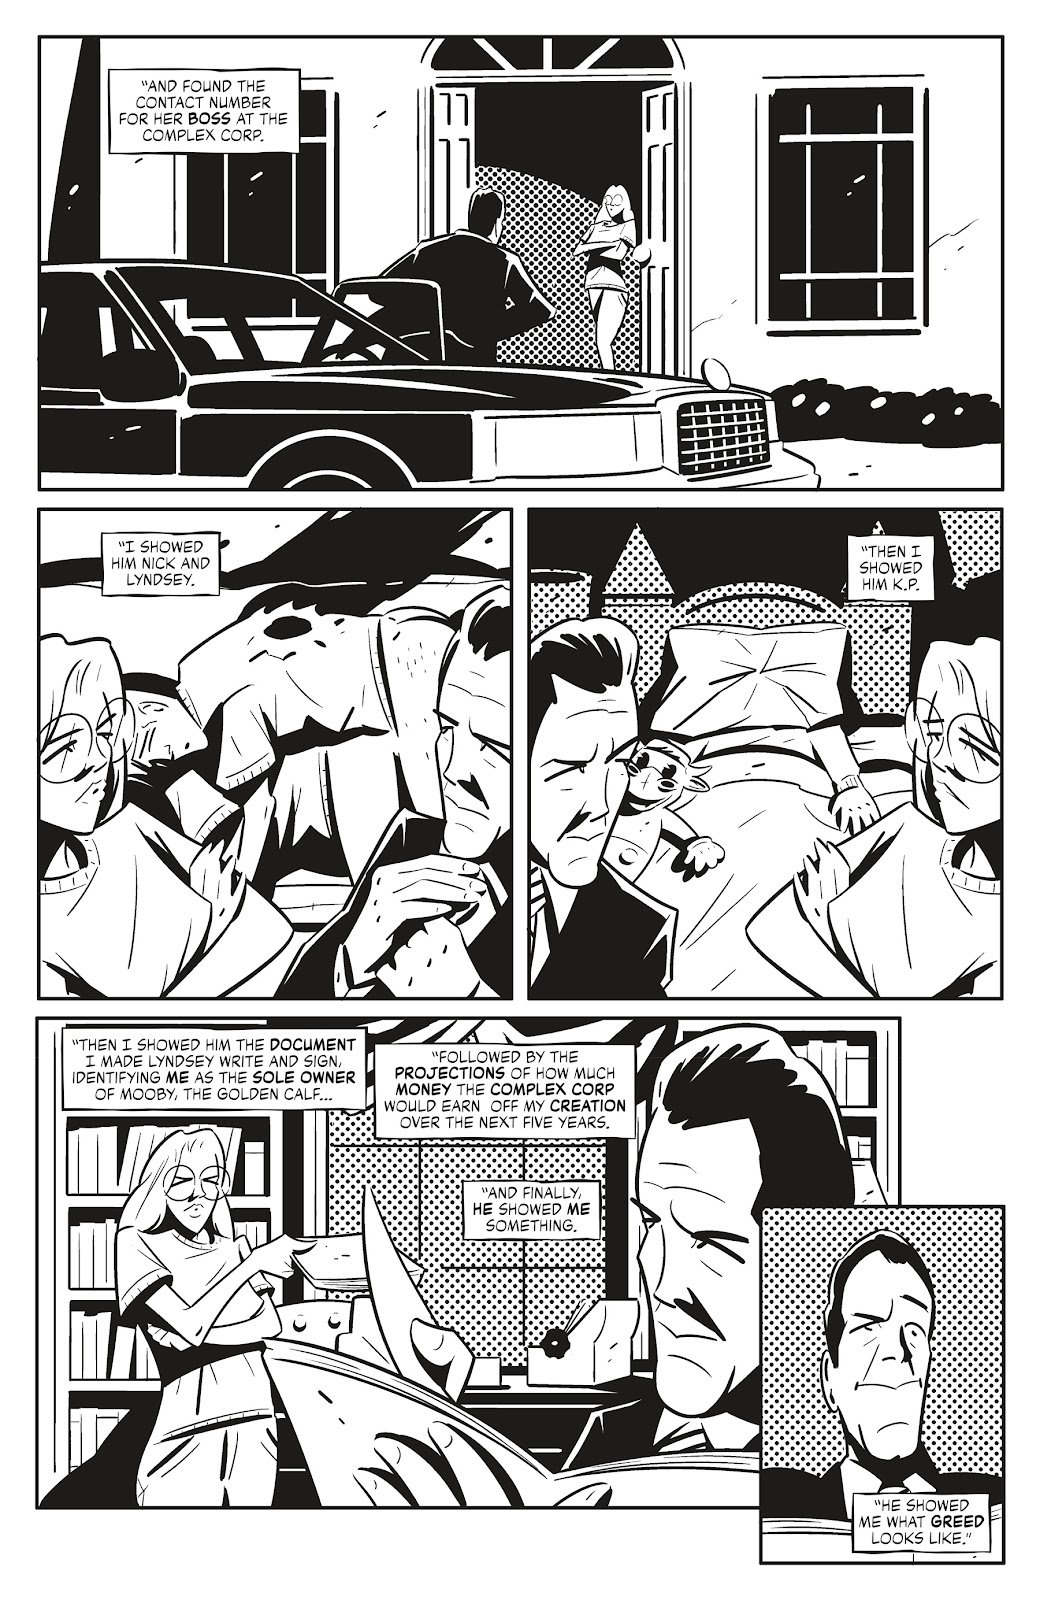 Quick Stops Vol. 2 issue 3 - Page 19